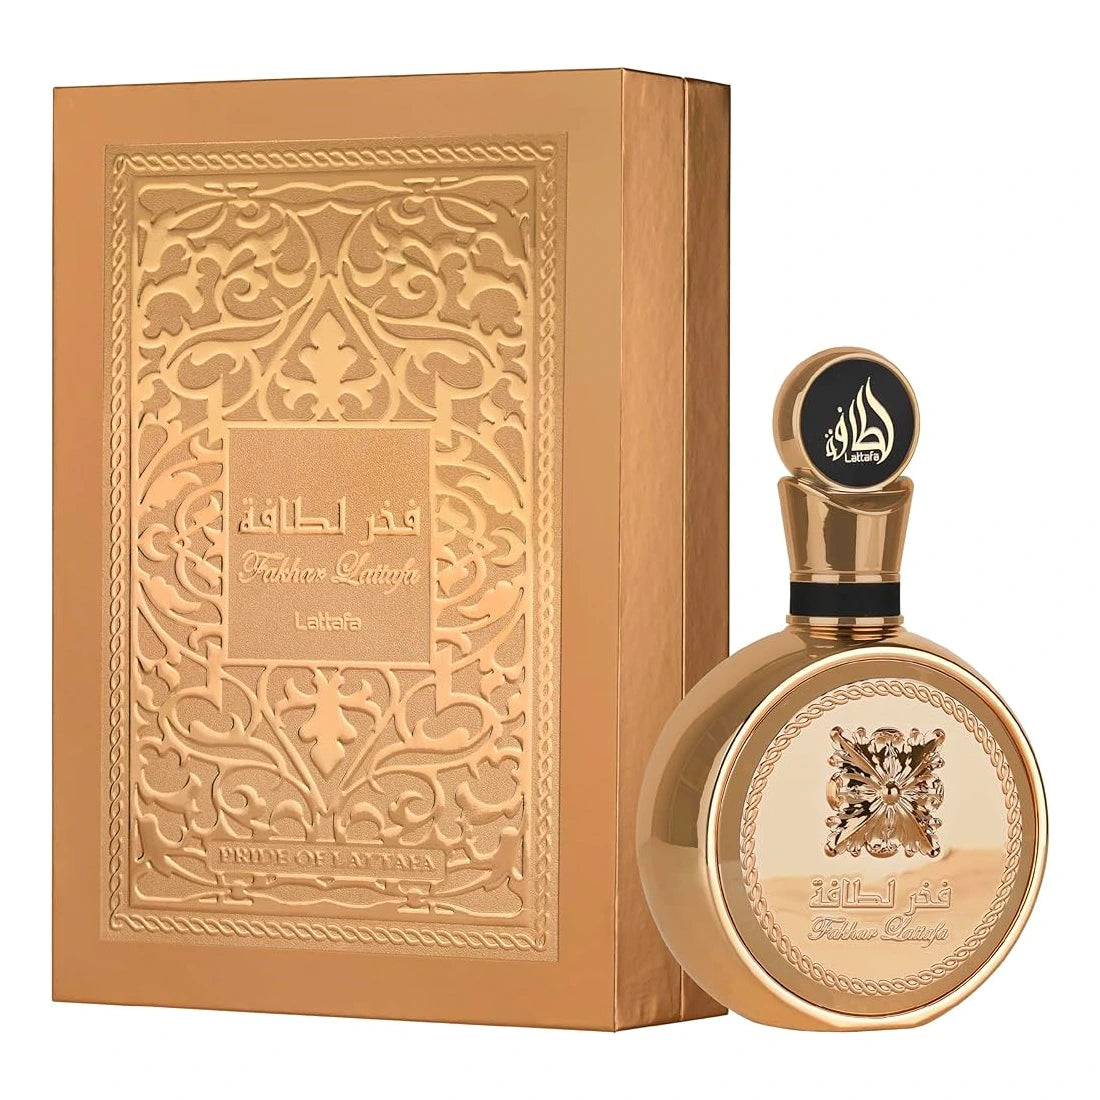 <p><em>﻿INSPIRED BY </em><strong>﻿PACO RABANNE 1 MILLION PARFUM</strong></p>
<p>Indulge in the luxurious Fakhar Extrait, a captivating fragrance for women. From the esteemed Lattafa Perfumes, this new scent features top notes of Grapefruit, Pink Pepper, and Cardamom, with a heart of Tuberose, Solar Notes, and Artemisia, all resting on a base of Labdanum, Amber, Cashmeran, and Leather. Experience the essence of elegance and exclusivity with this 3.4 oz unisex EDP.</p>